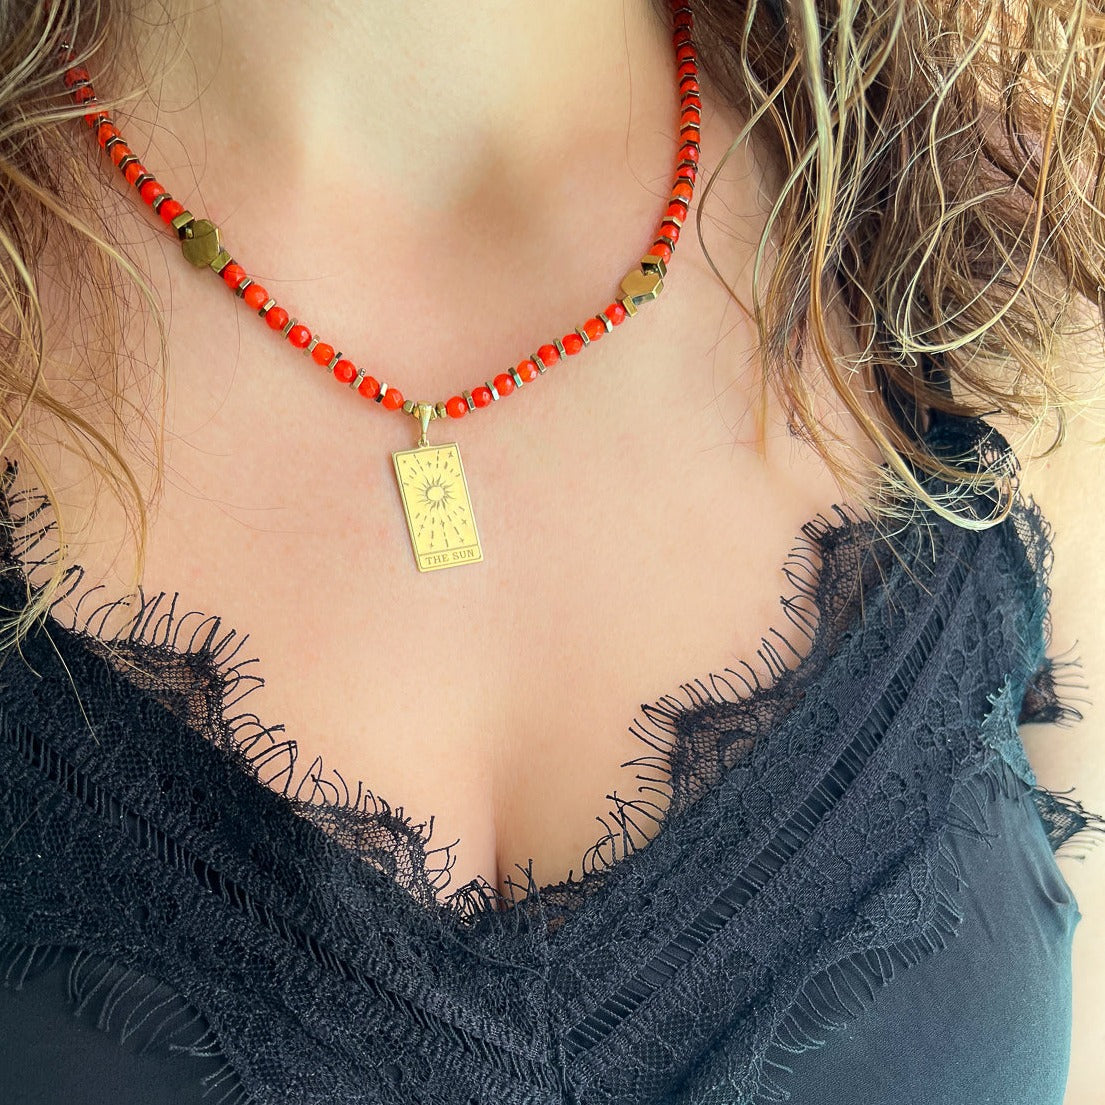 Model Wearing Gold Hematite Stone Necklace: Grounded and centered in style